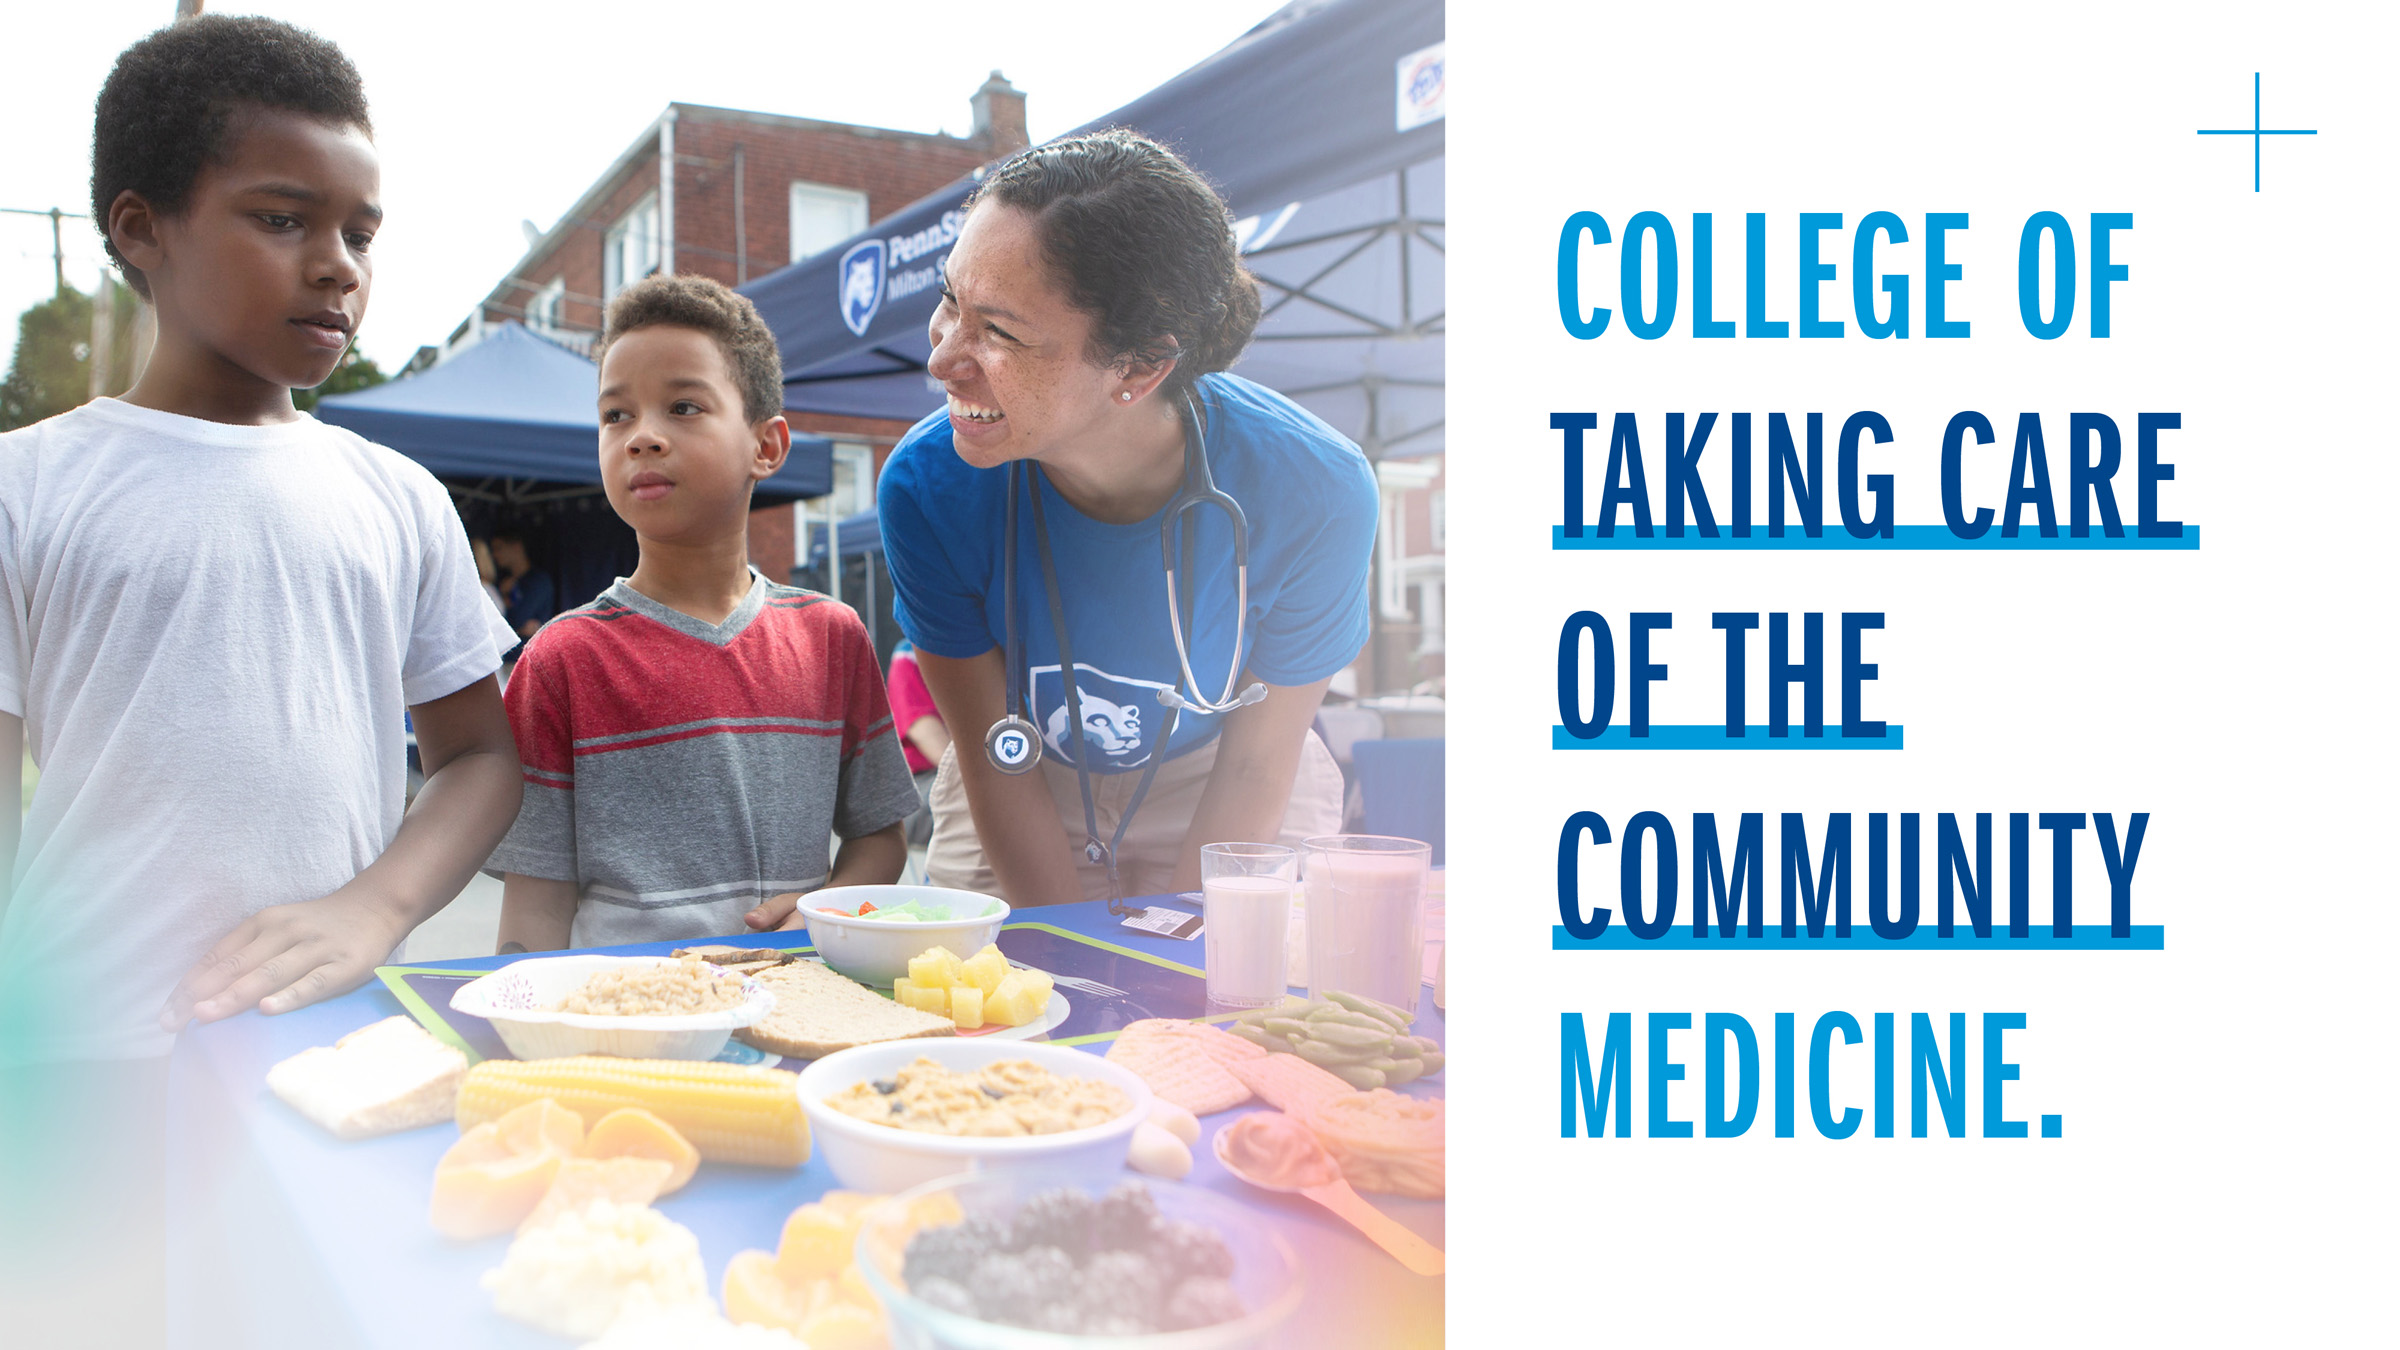 College of Taking Care of the Community Medicine with college staff member looking at a young boy smiling, another boy is between them and a table of food in front.